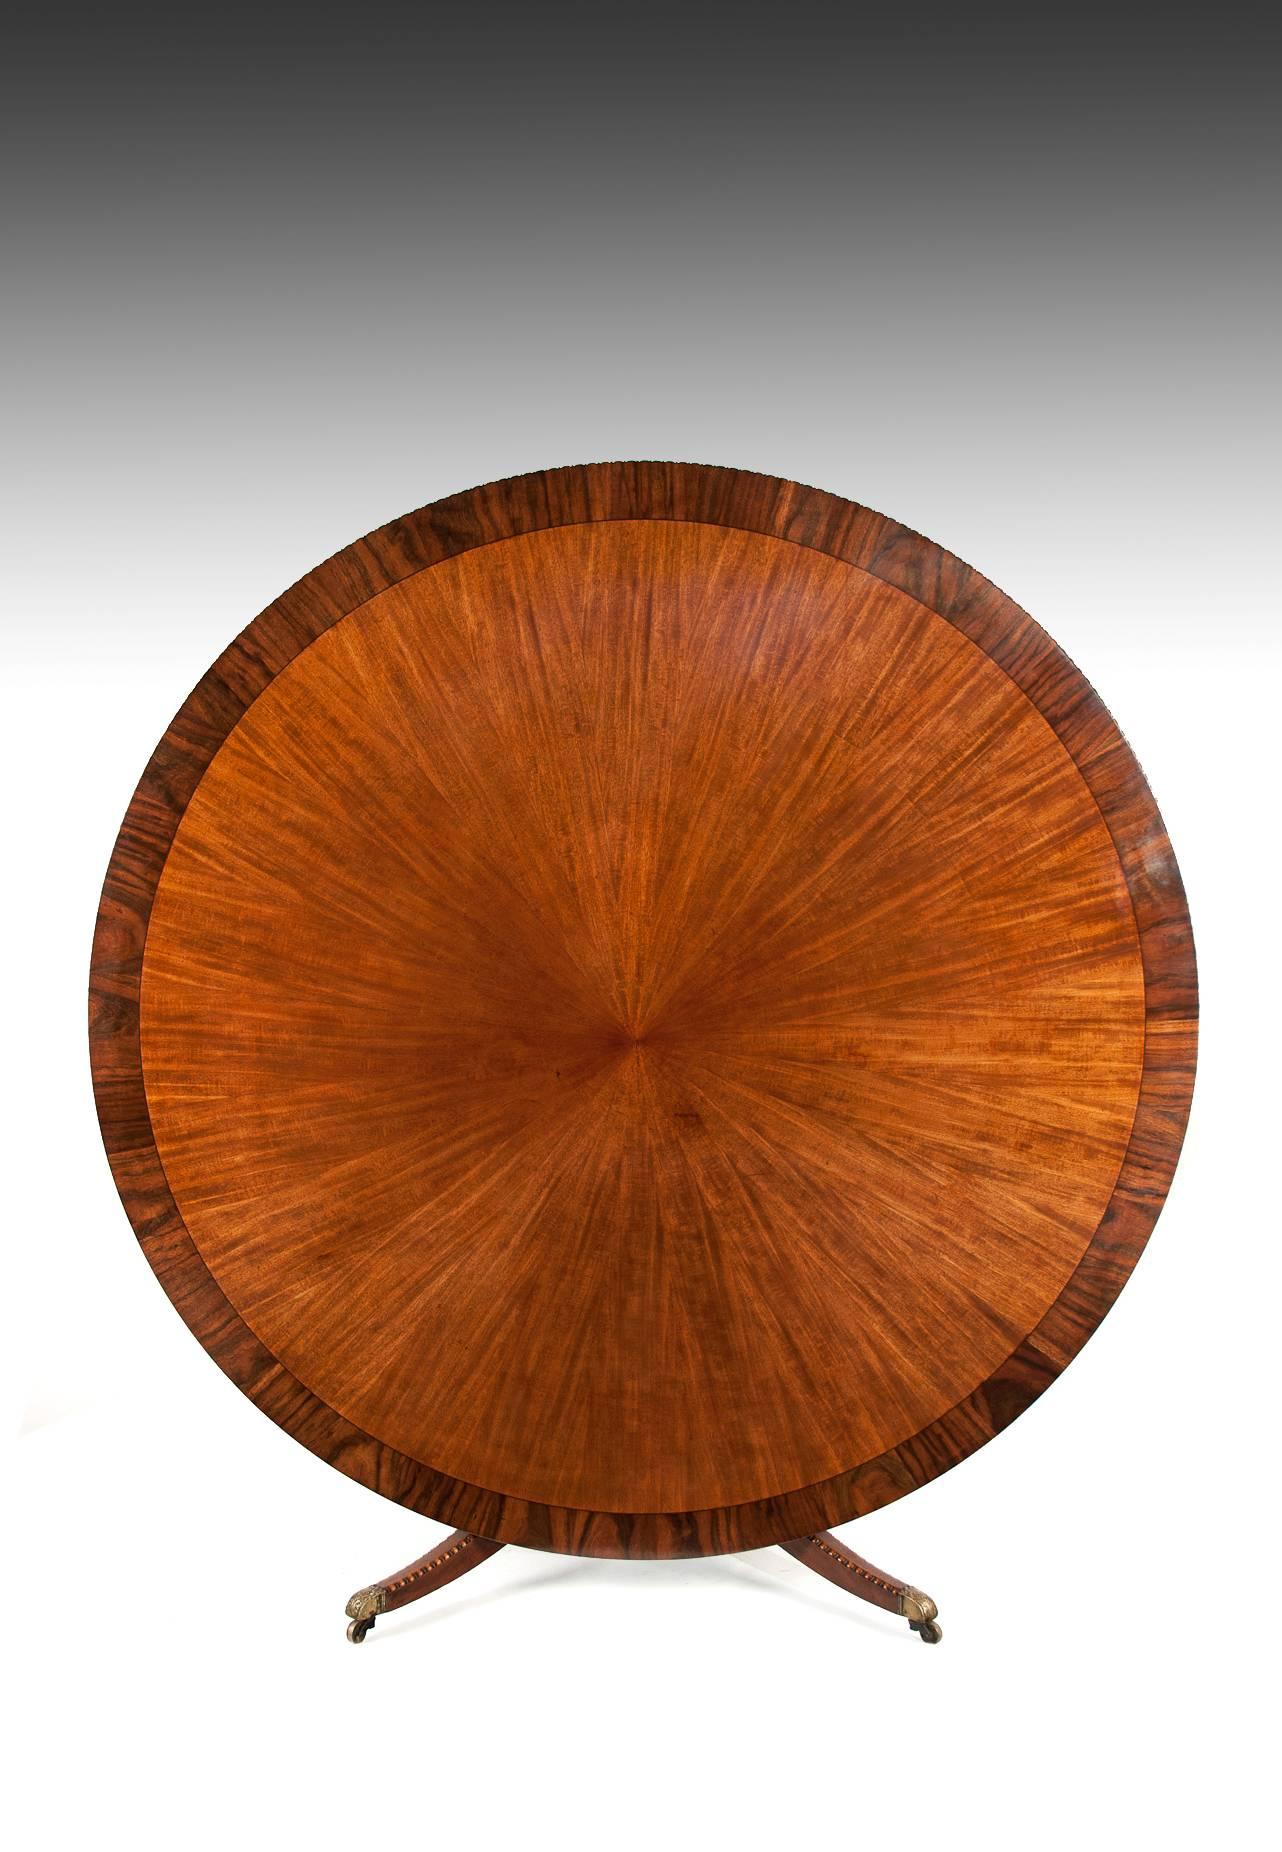 A very rare and extremely large 6 feet in diameter late Victorian tilt top sunburst mahogany dining table with ebony strung and coromandel banded edge, circa 1890.
This stunning antique circular dining table is extremely rare being 6 feet in